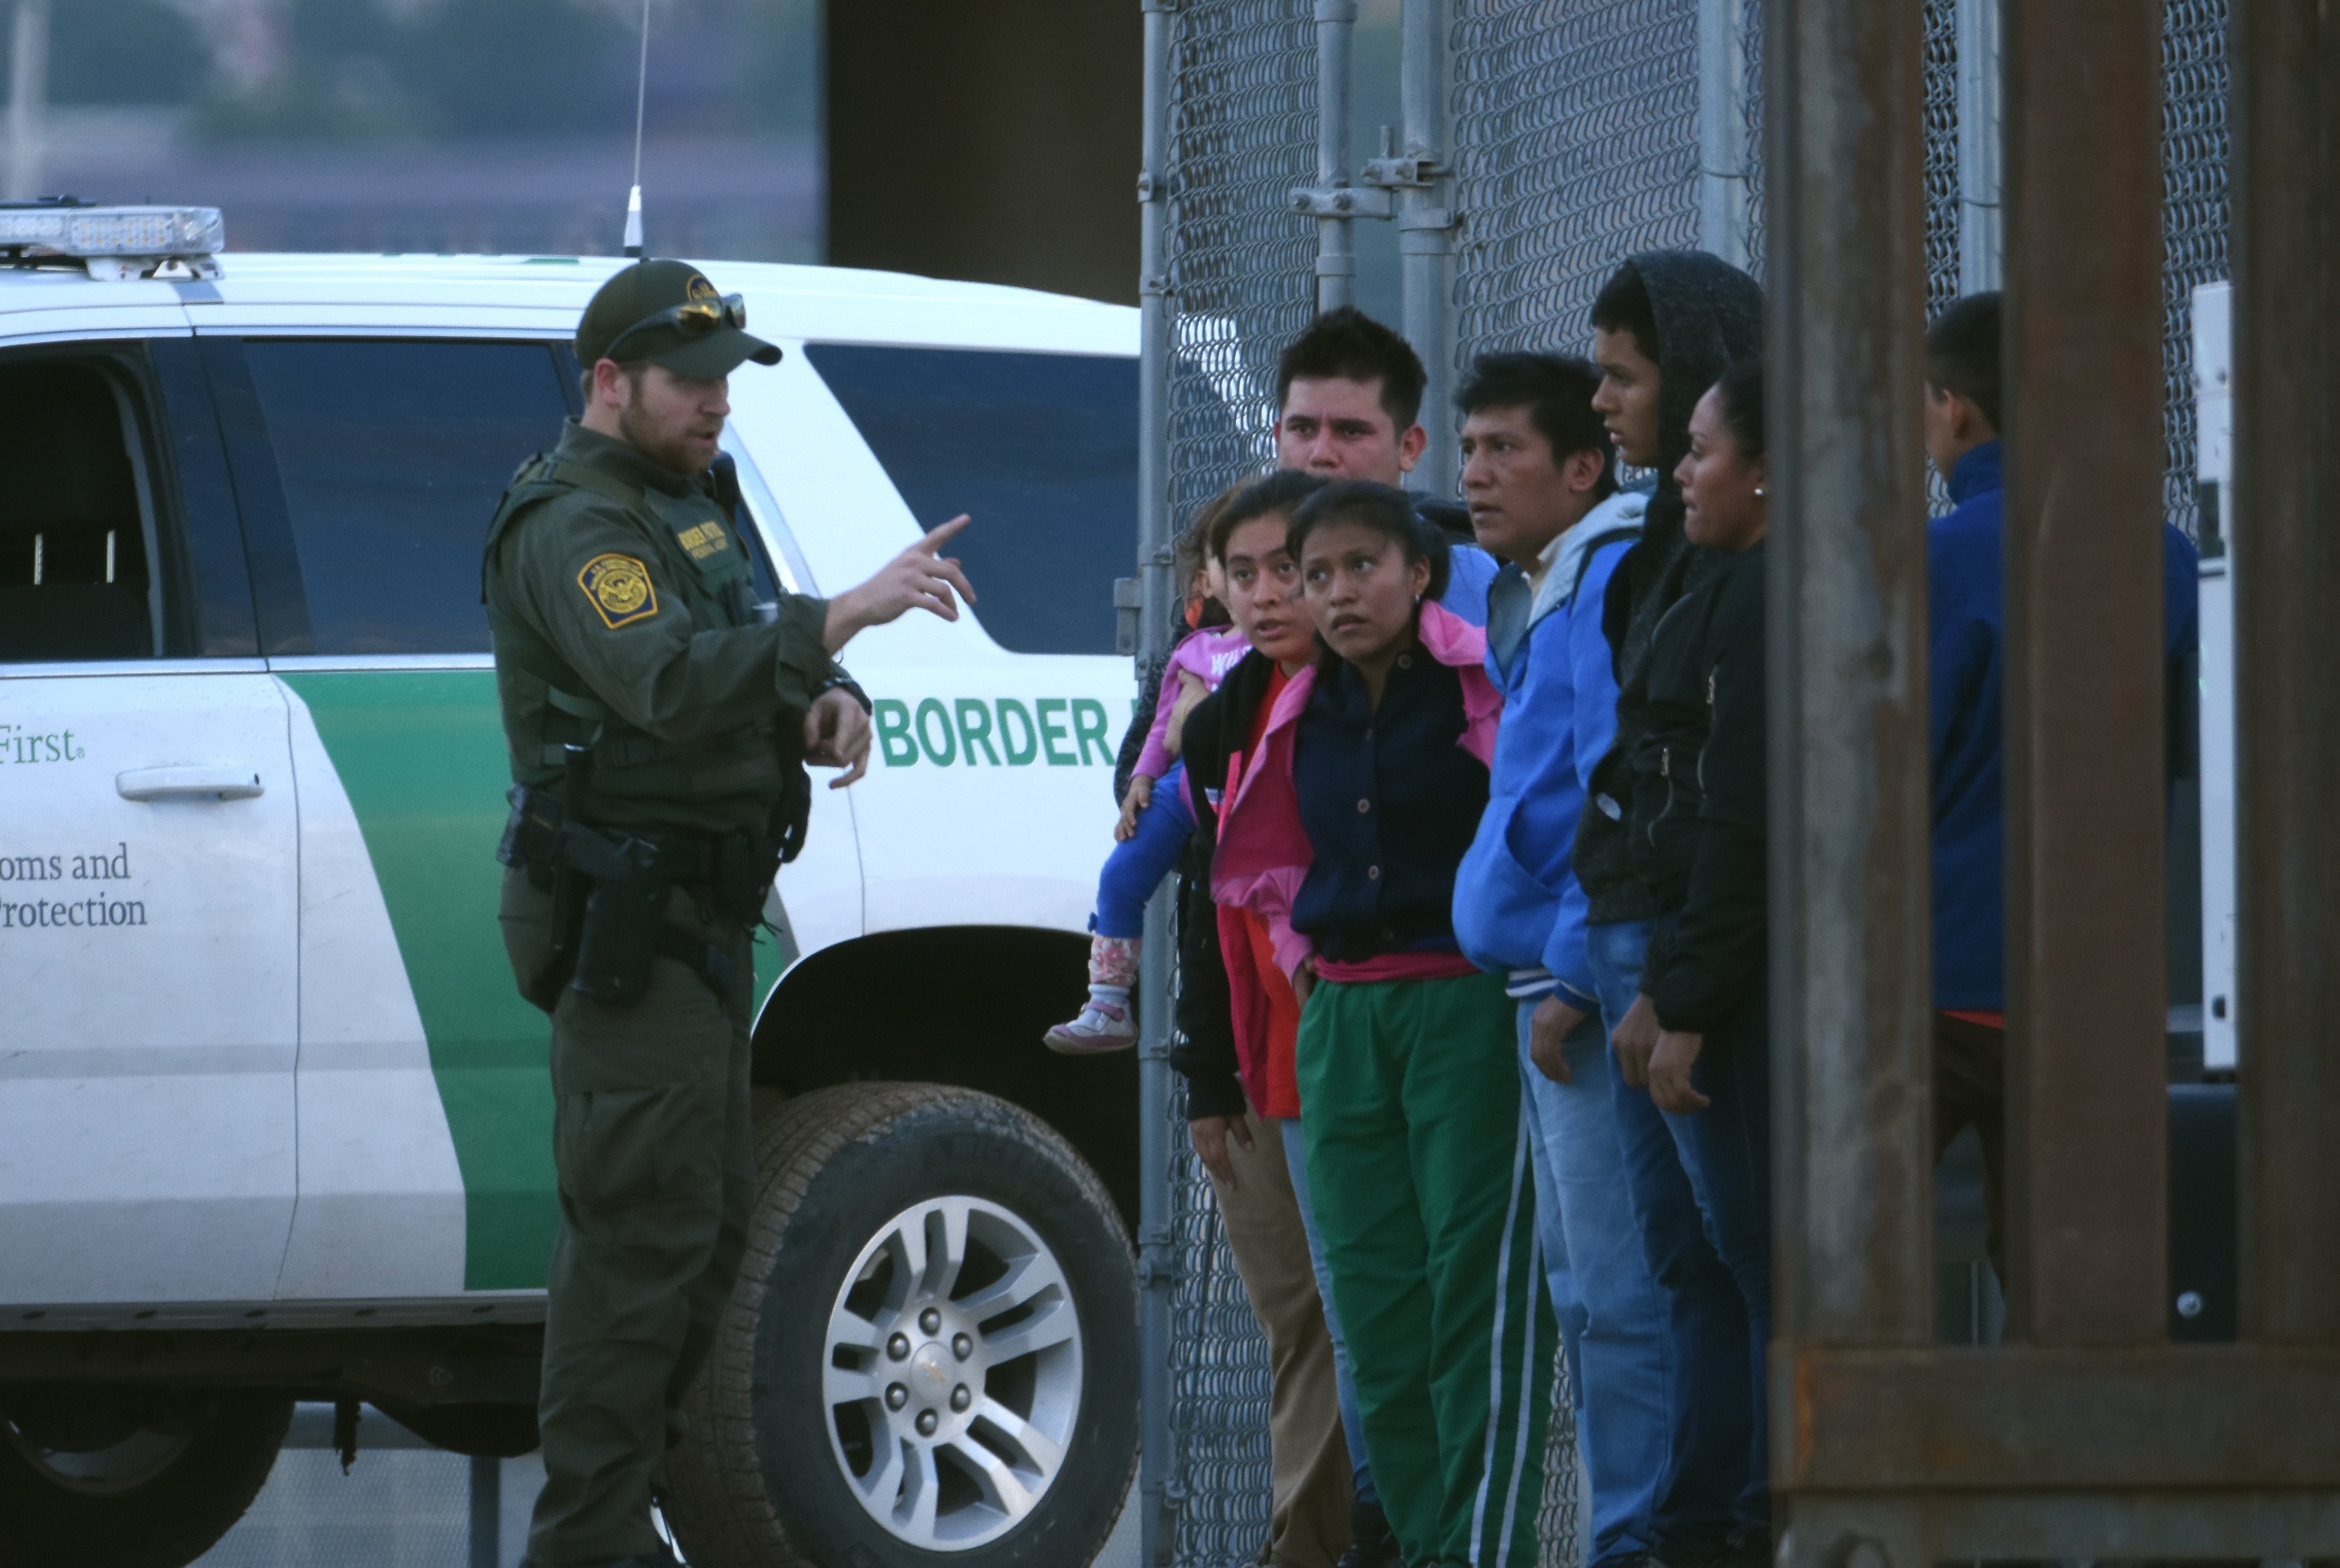 An agent of the US Border Forces talks to a group of group of young Central American migrants.